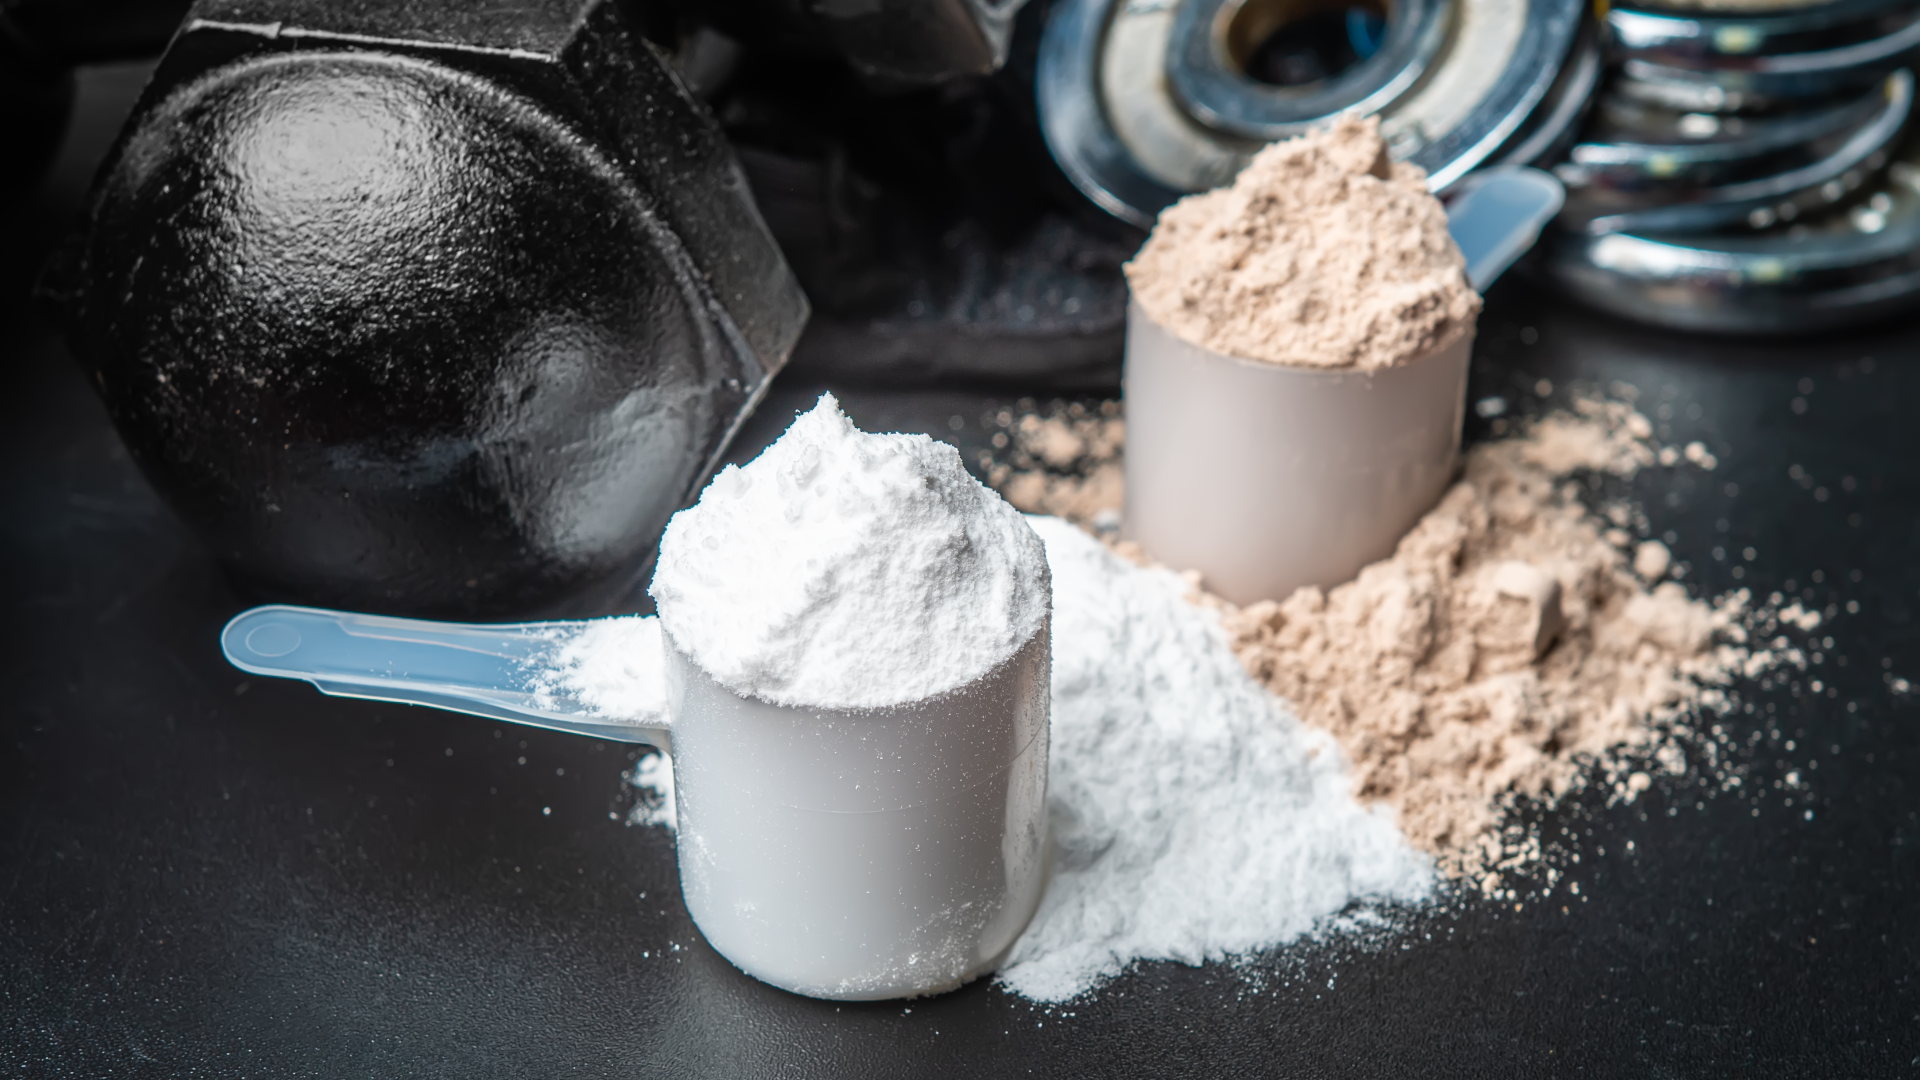 Clear whey and whey protein powders